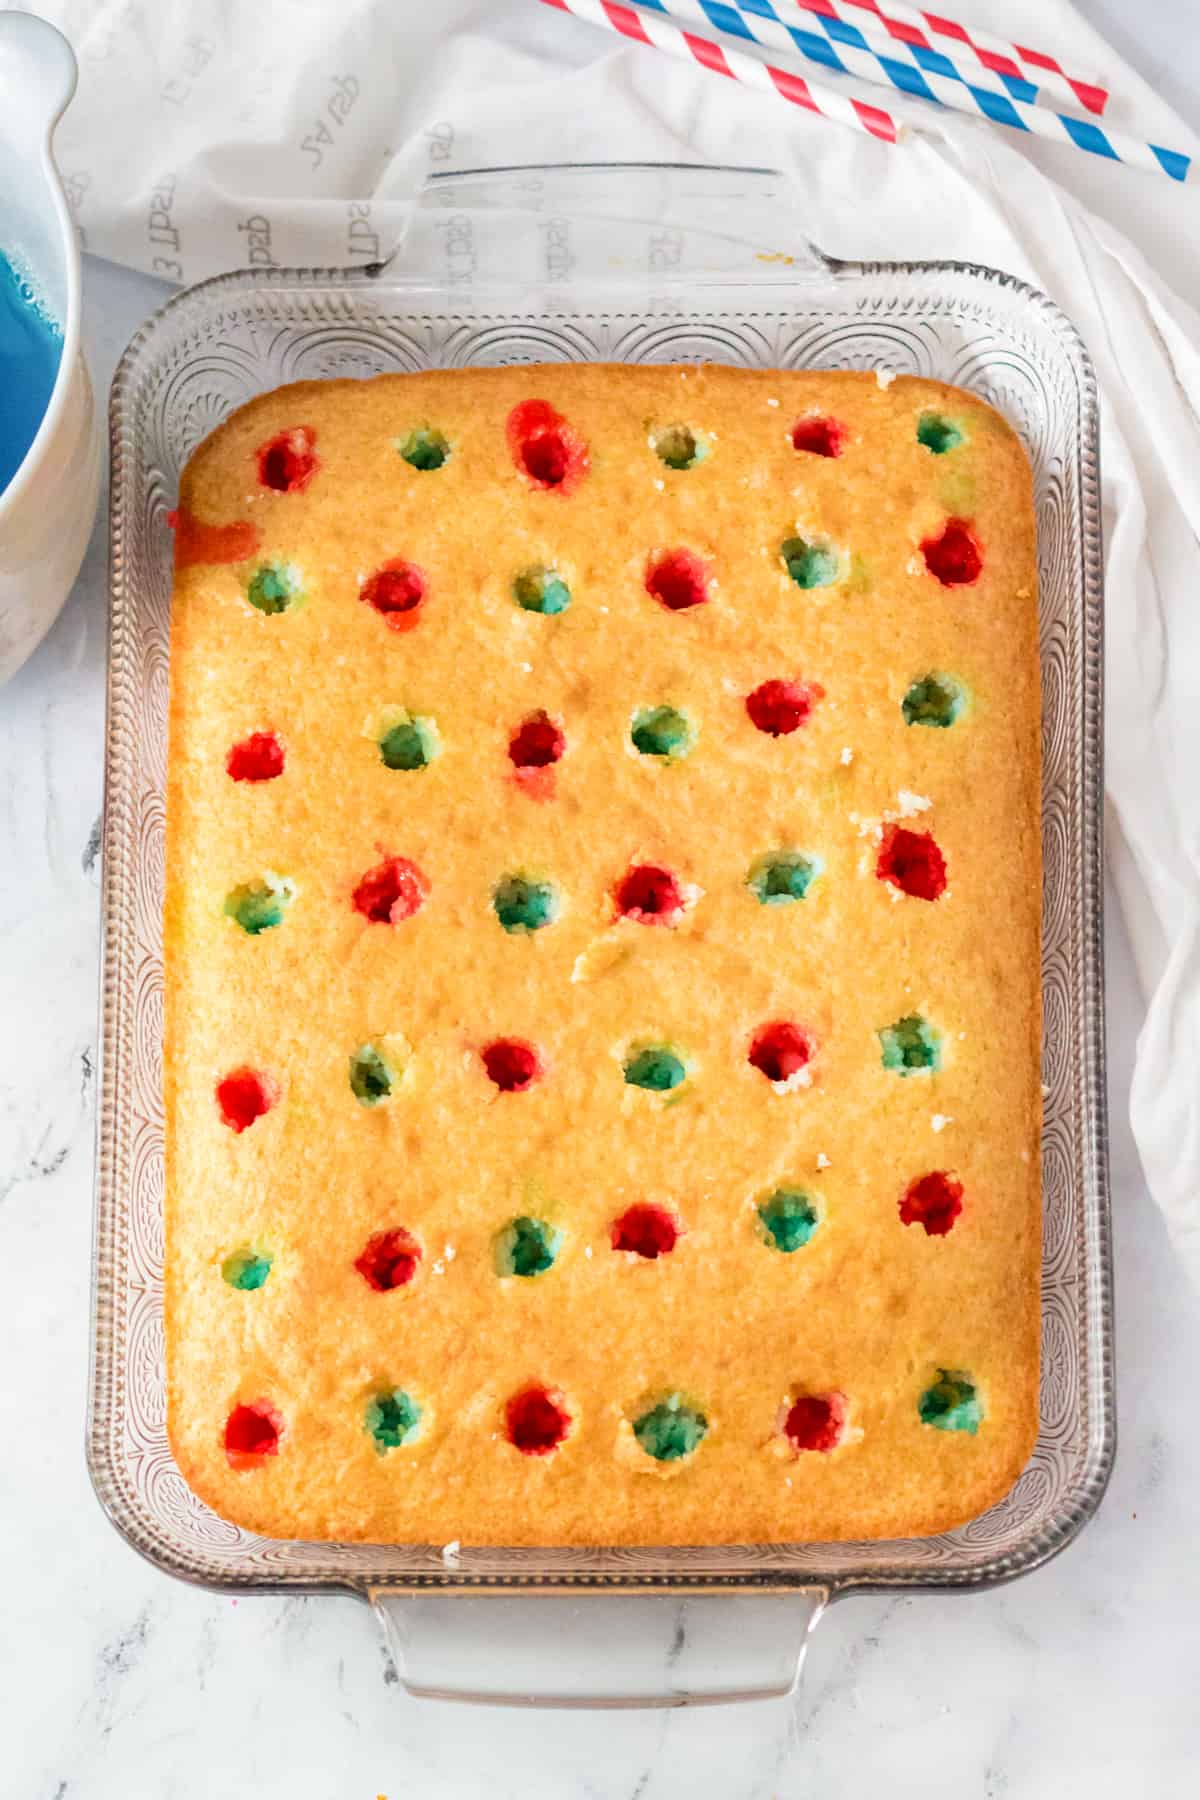 Golden cake with holes poked throughout the top and red and blue jello poured into alternating holes.